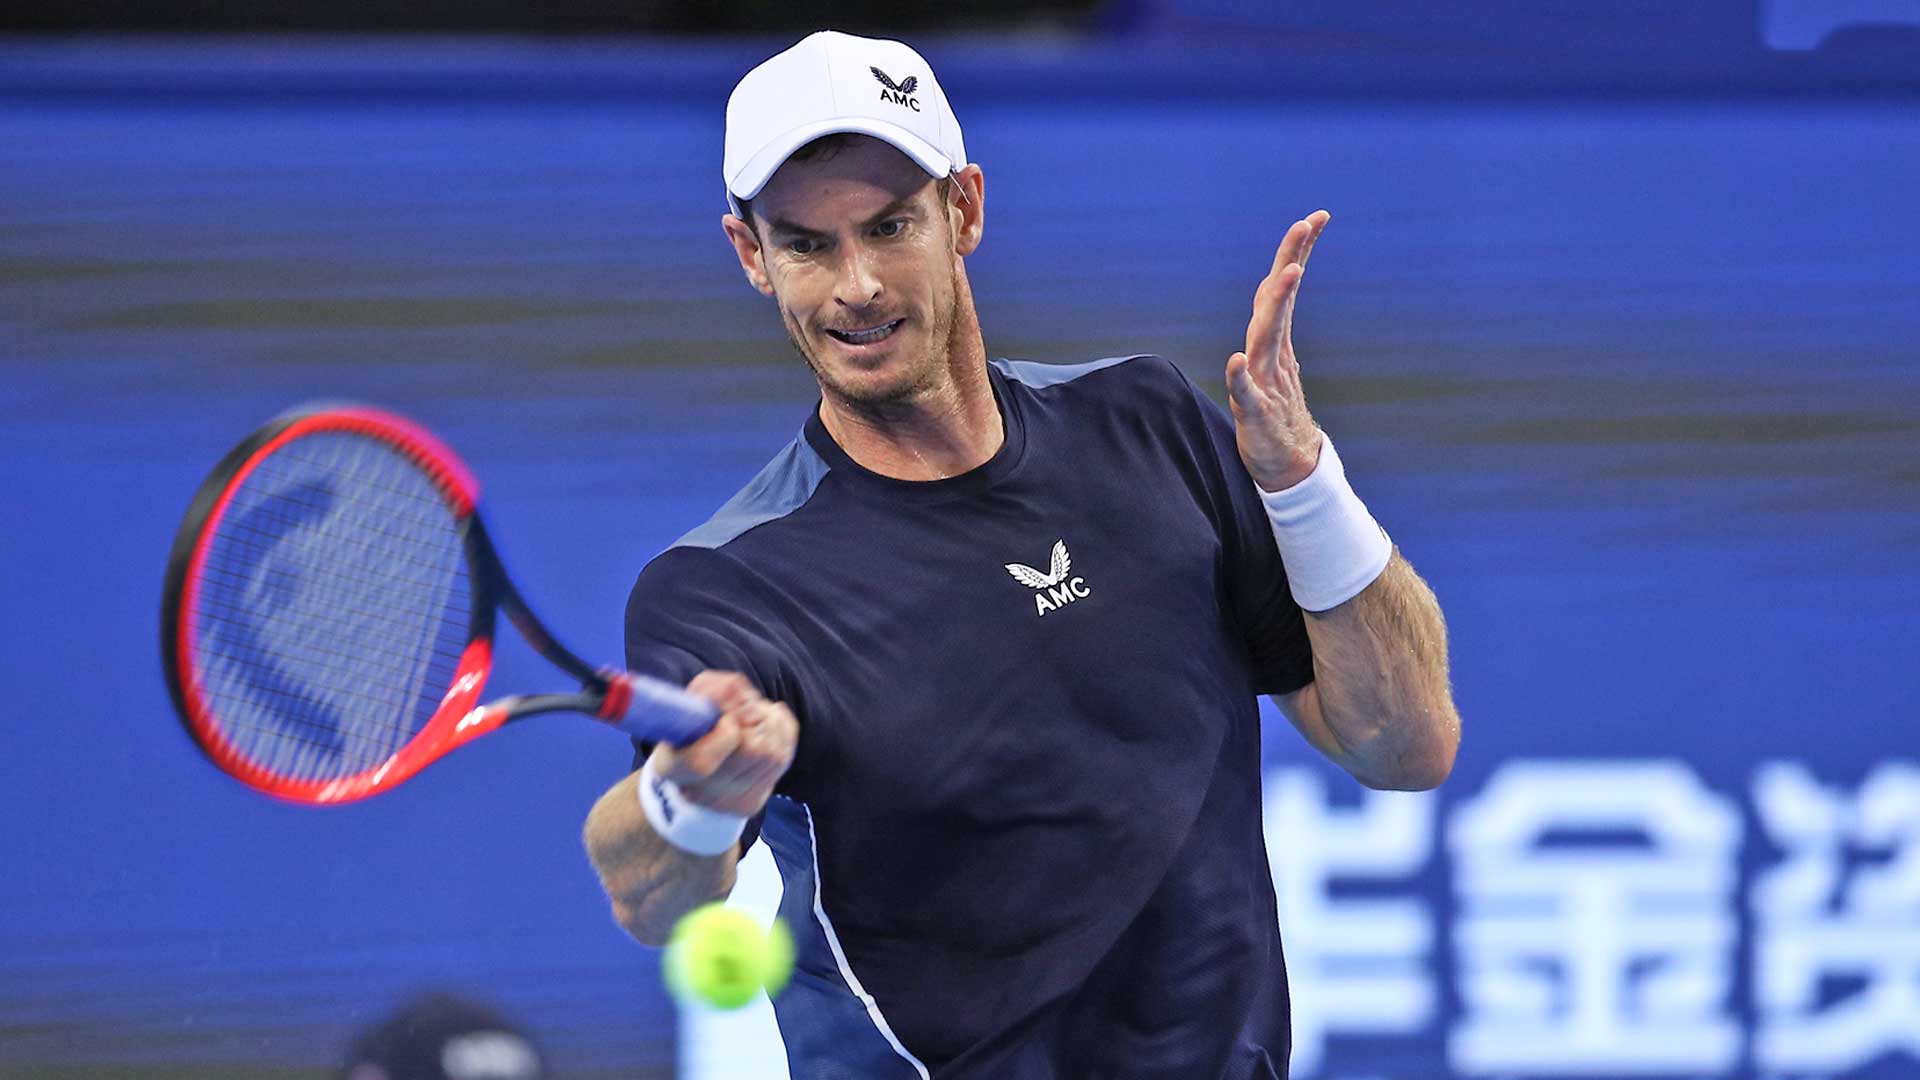 Andy Murray Makes Fast Start In Zhuhai ATP Tour Tennis